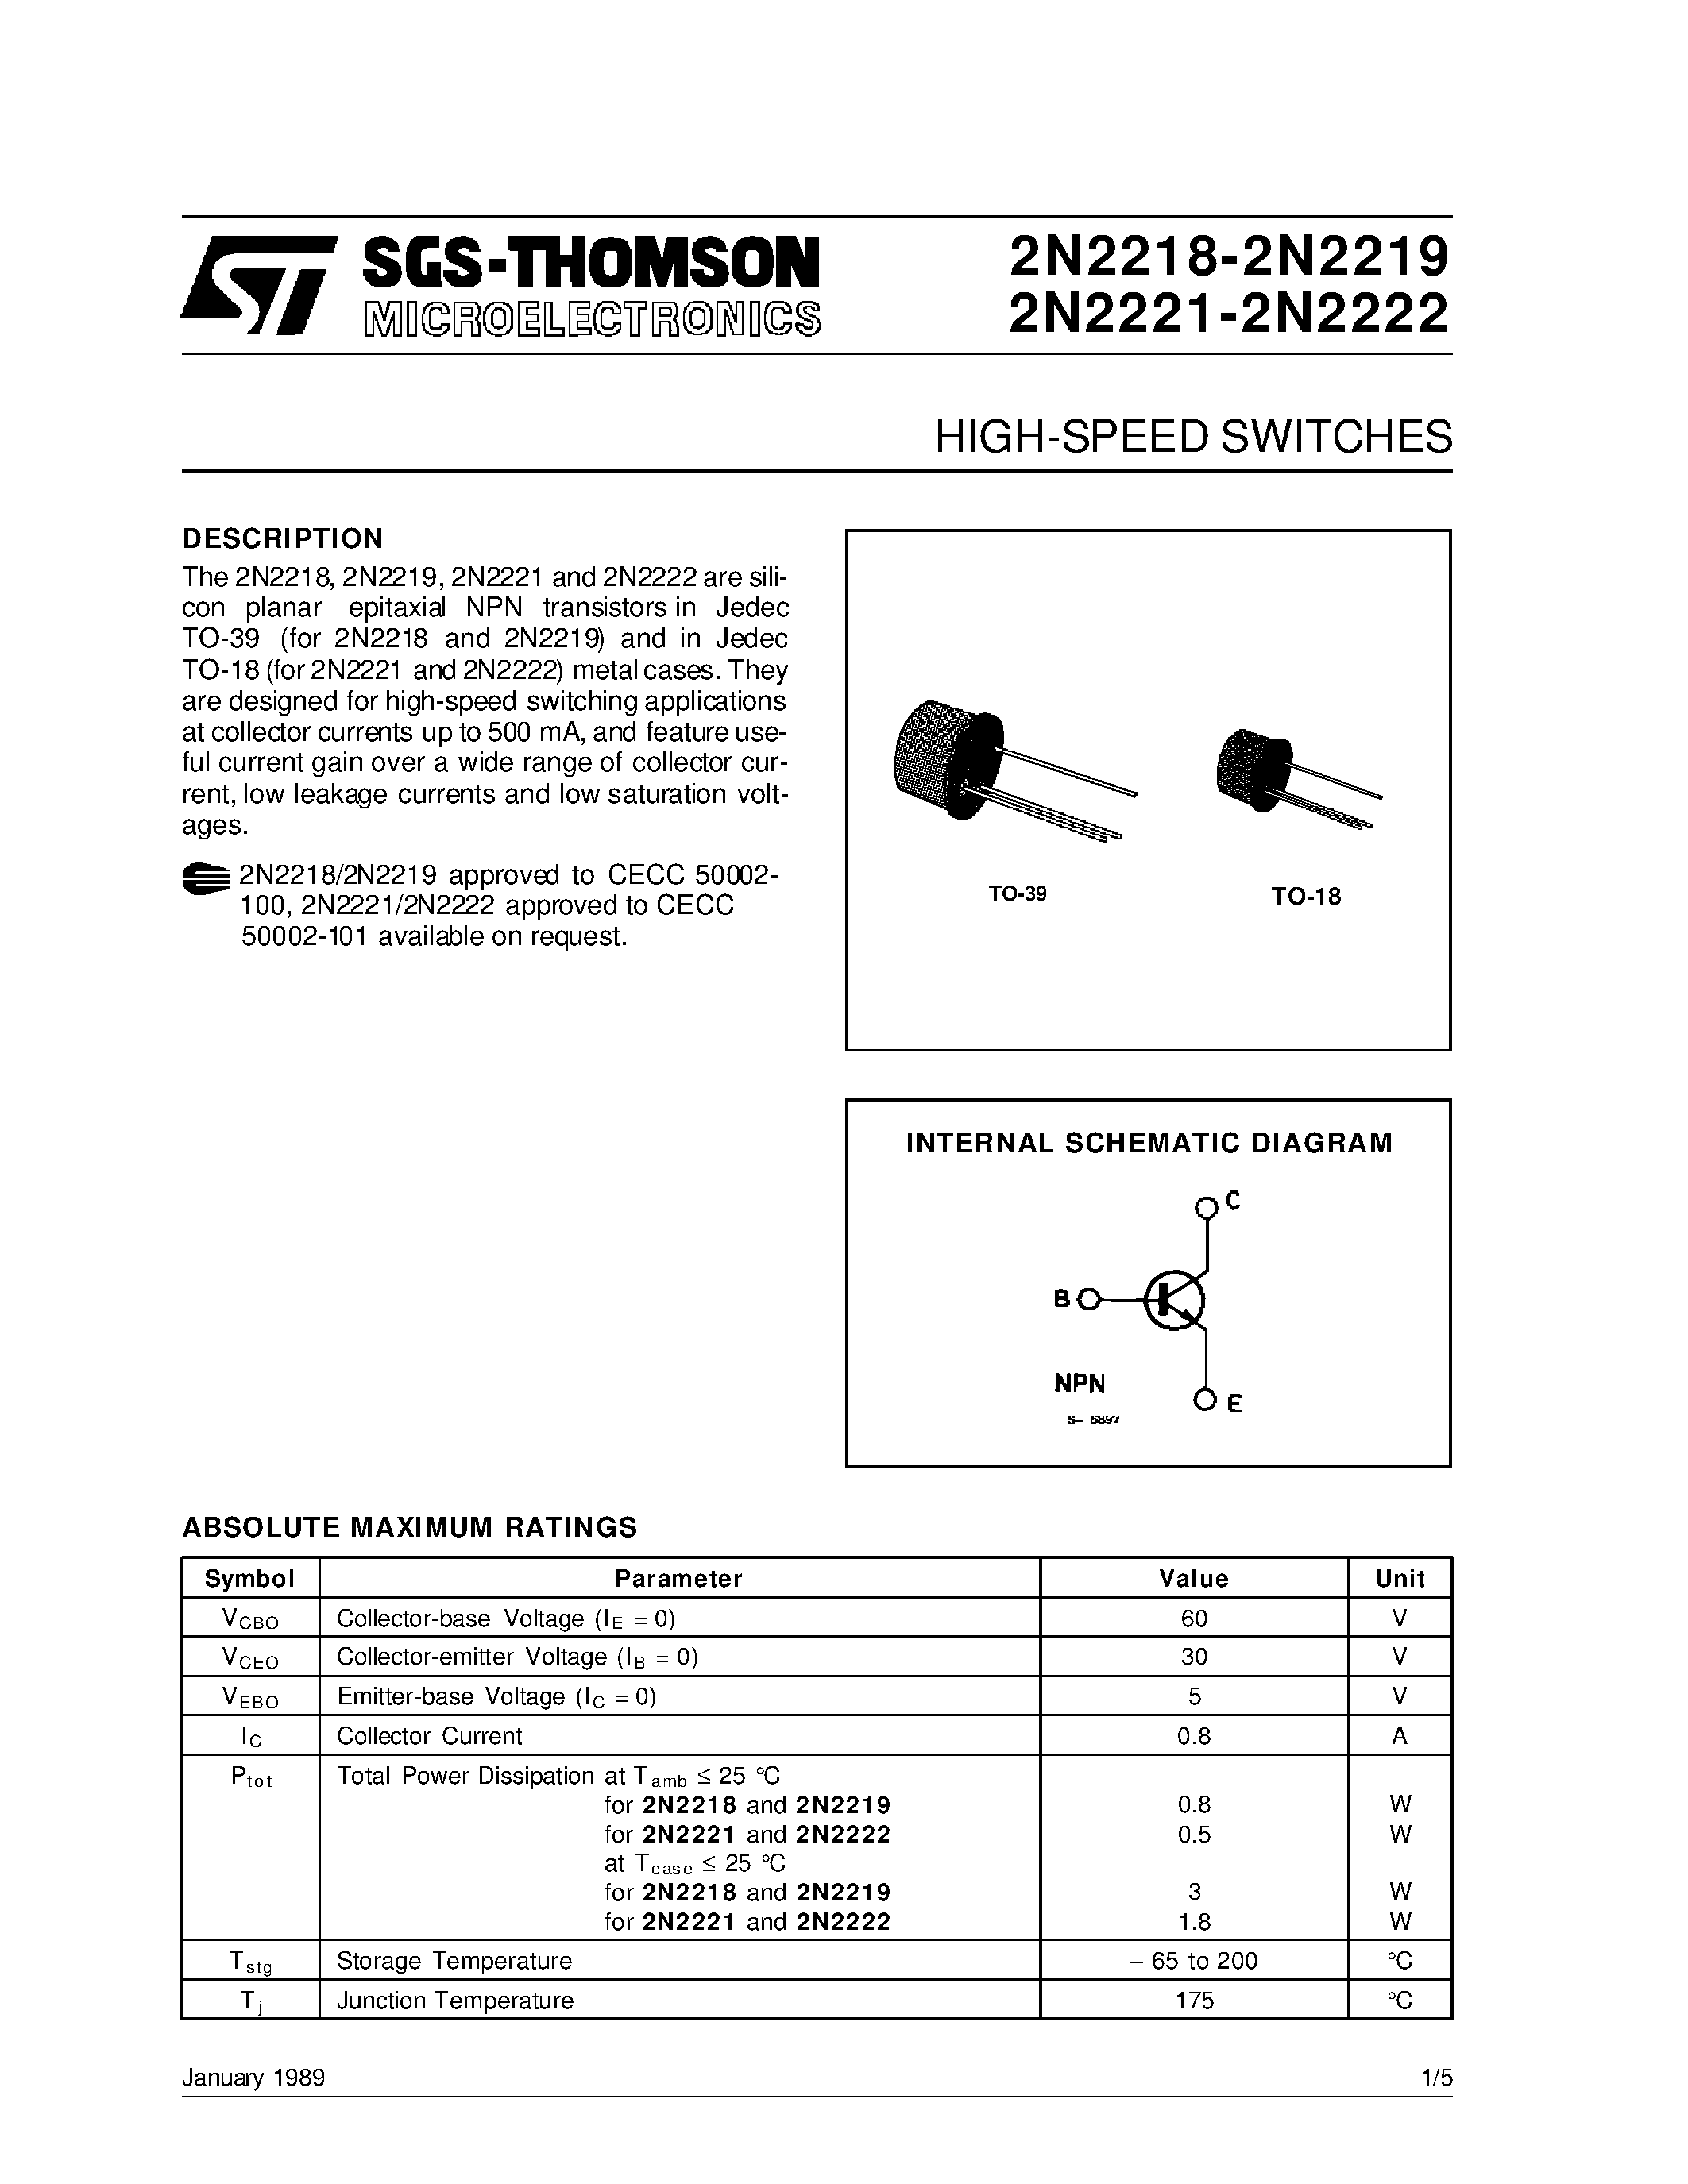 Datasheet 2N2218 - HIGH-SPEED SWITCHES page 1